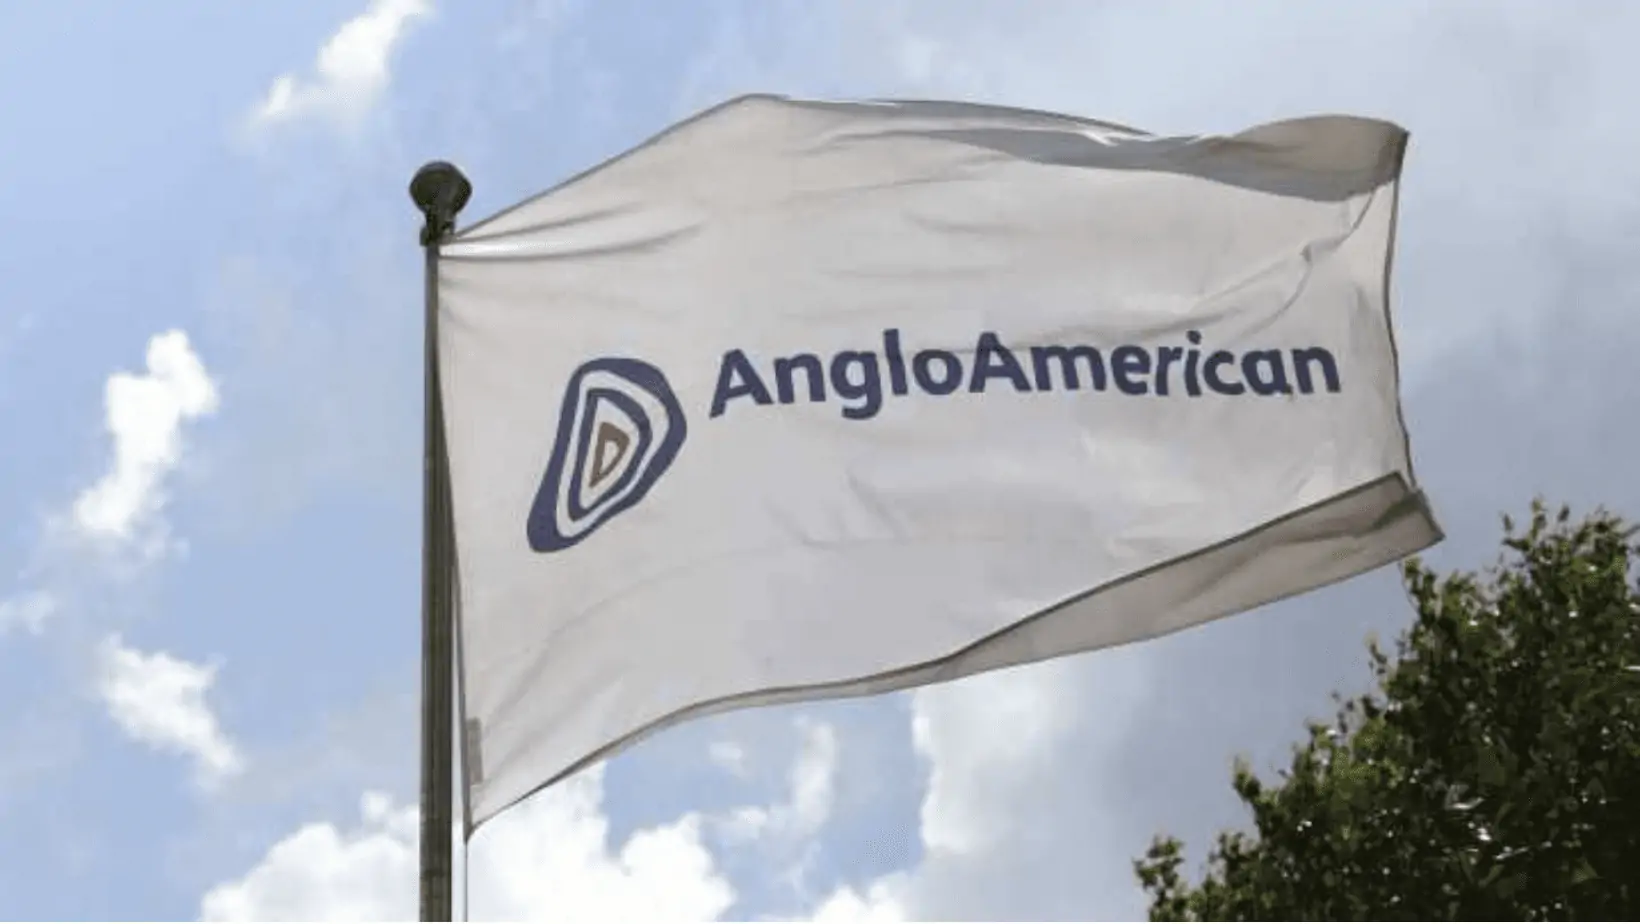 Anglo American Platinum Secures Renewable Energy Deal with Envusa Energy